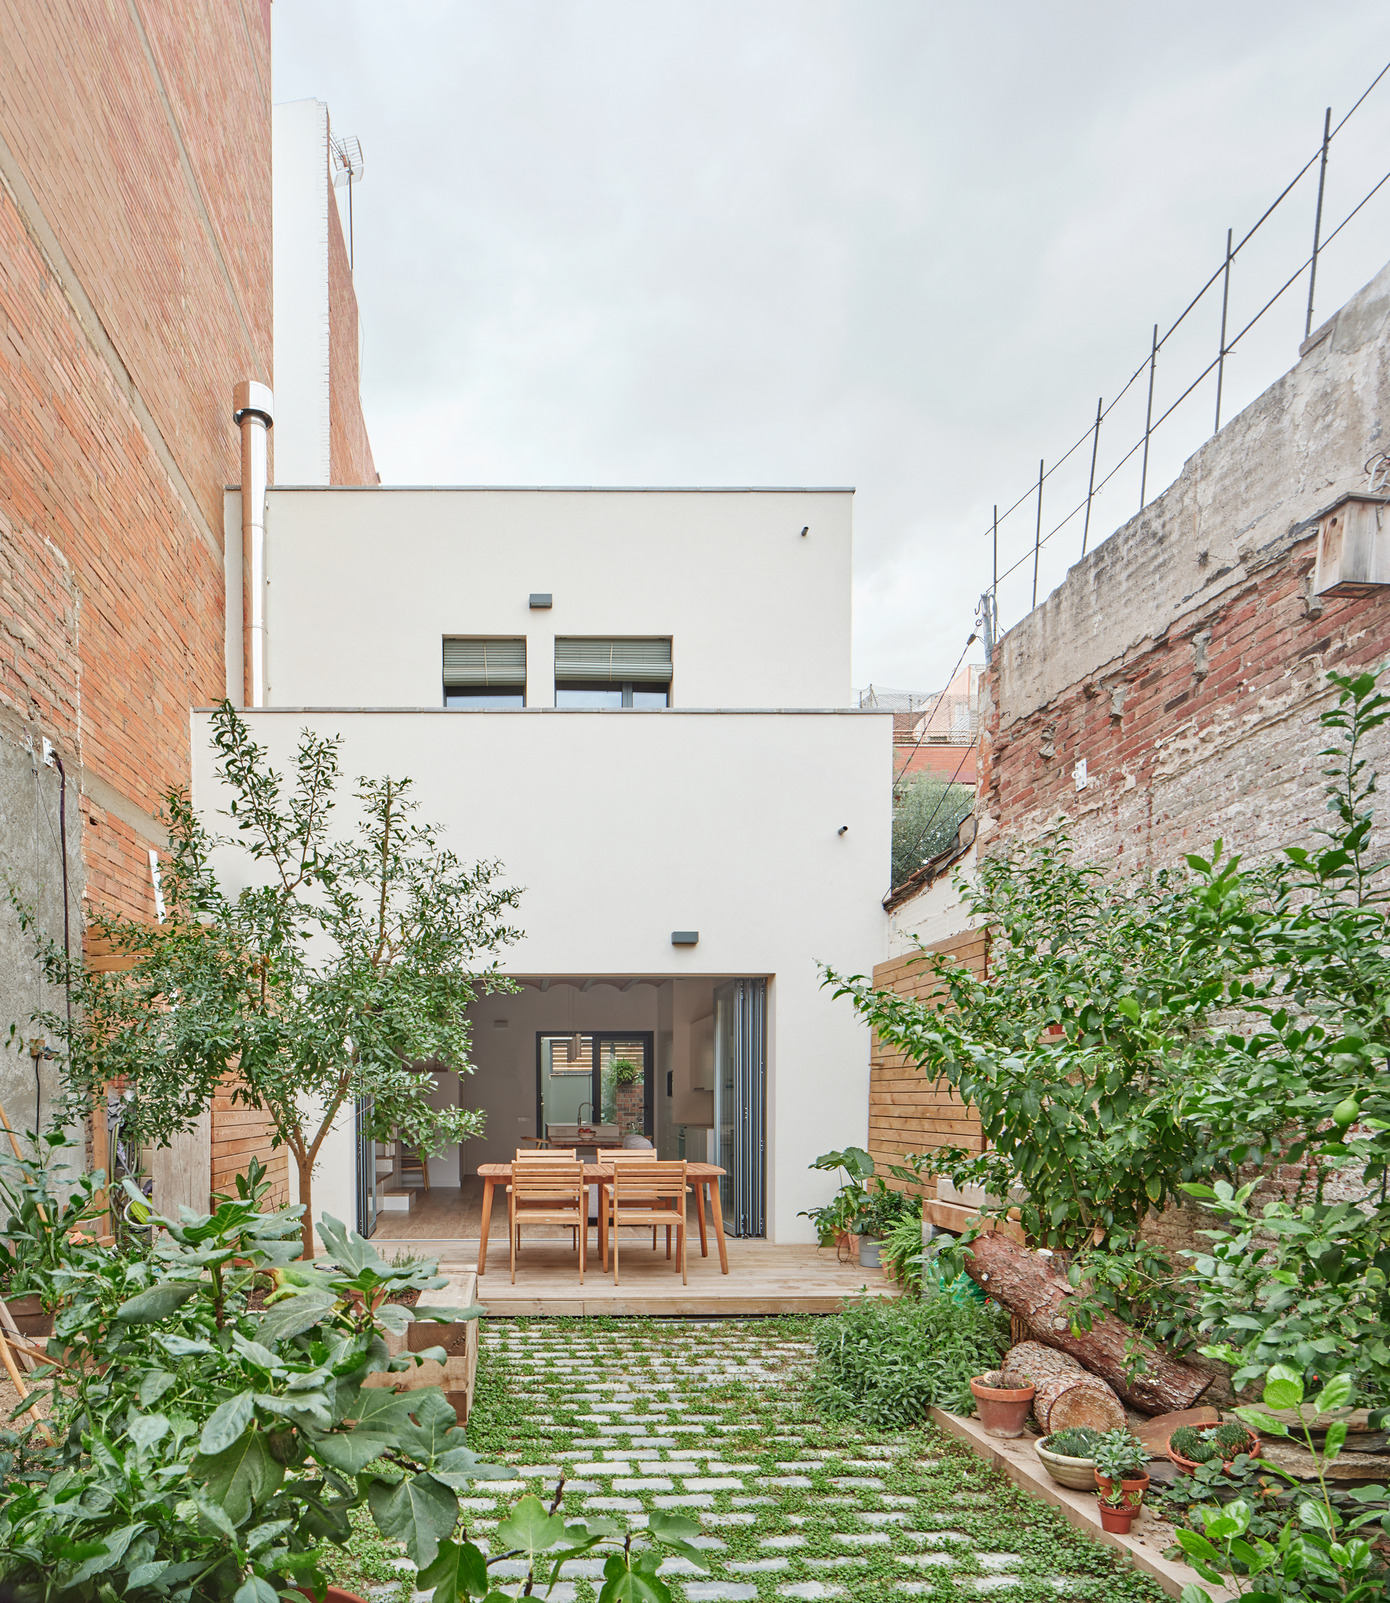 109LAY: A Bioclimatic House in Spain